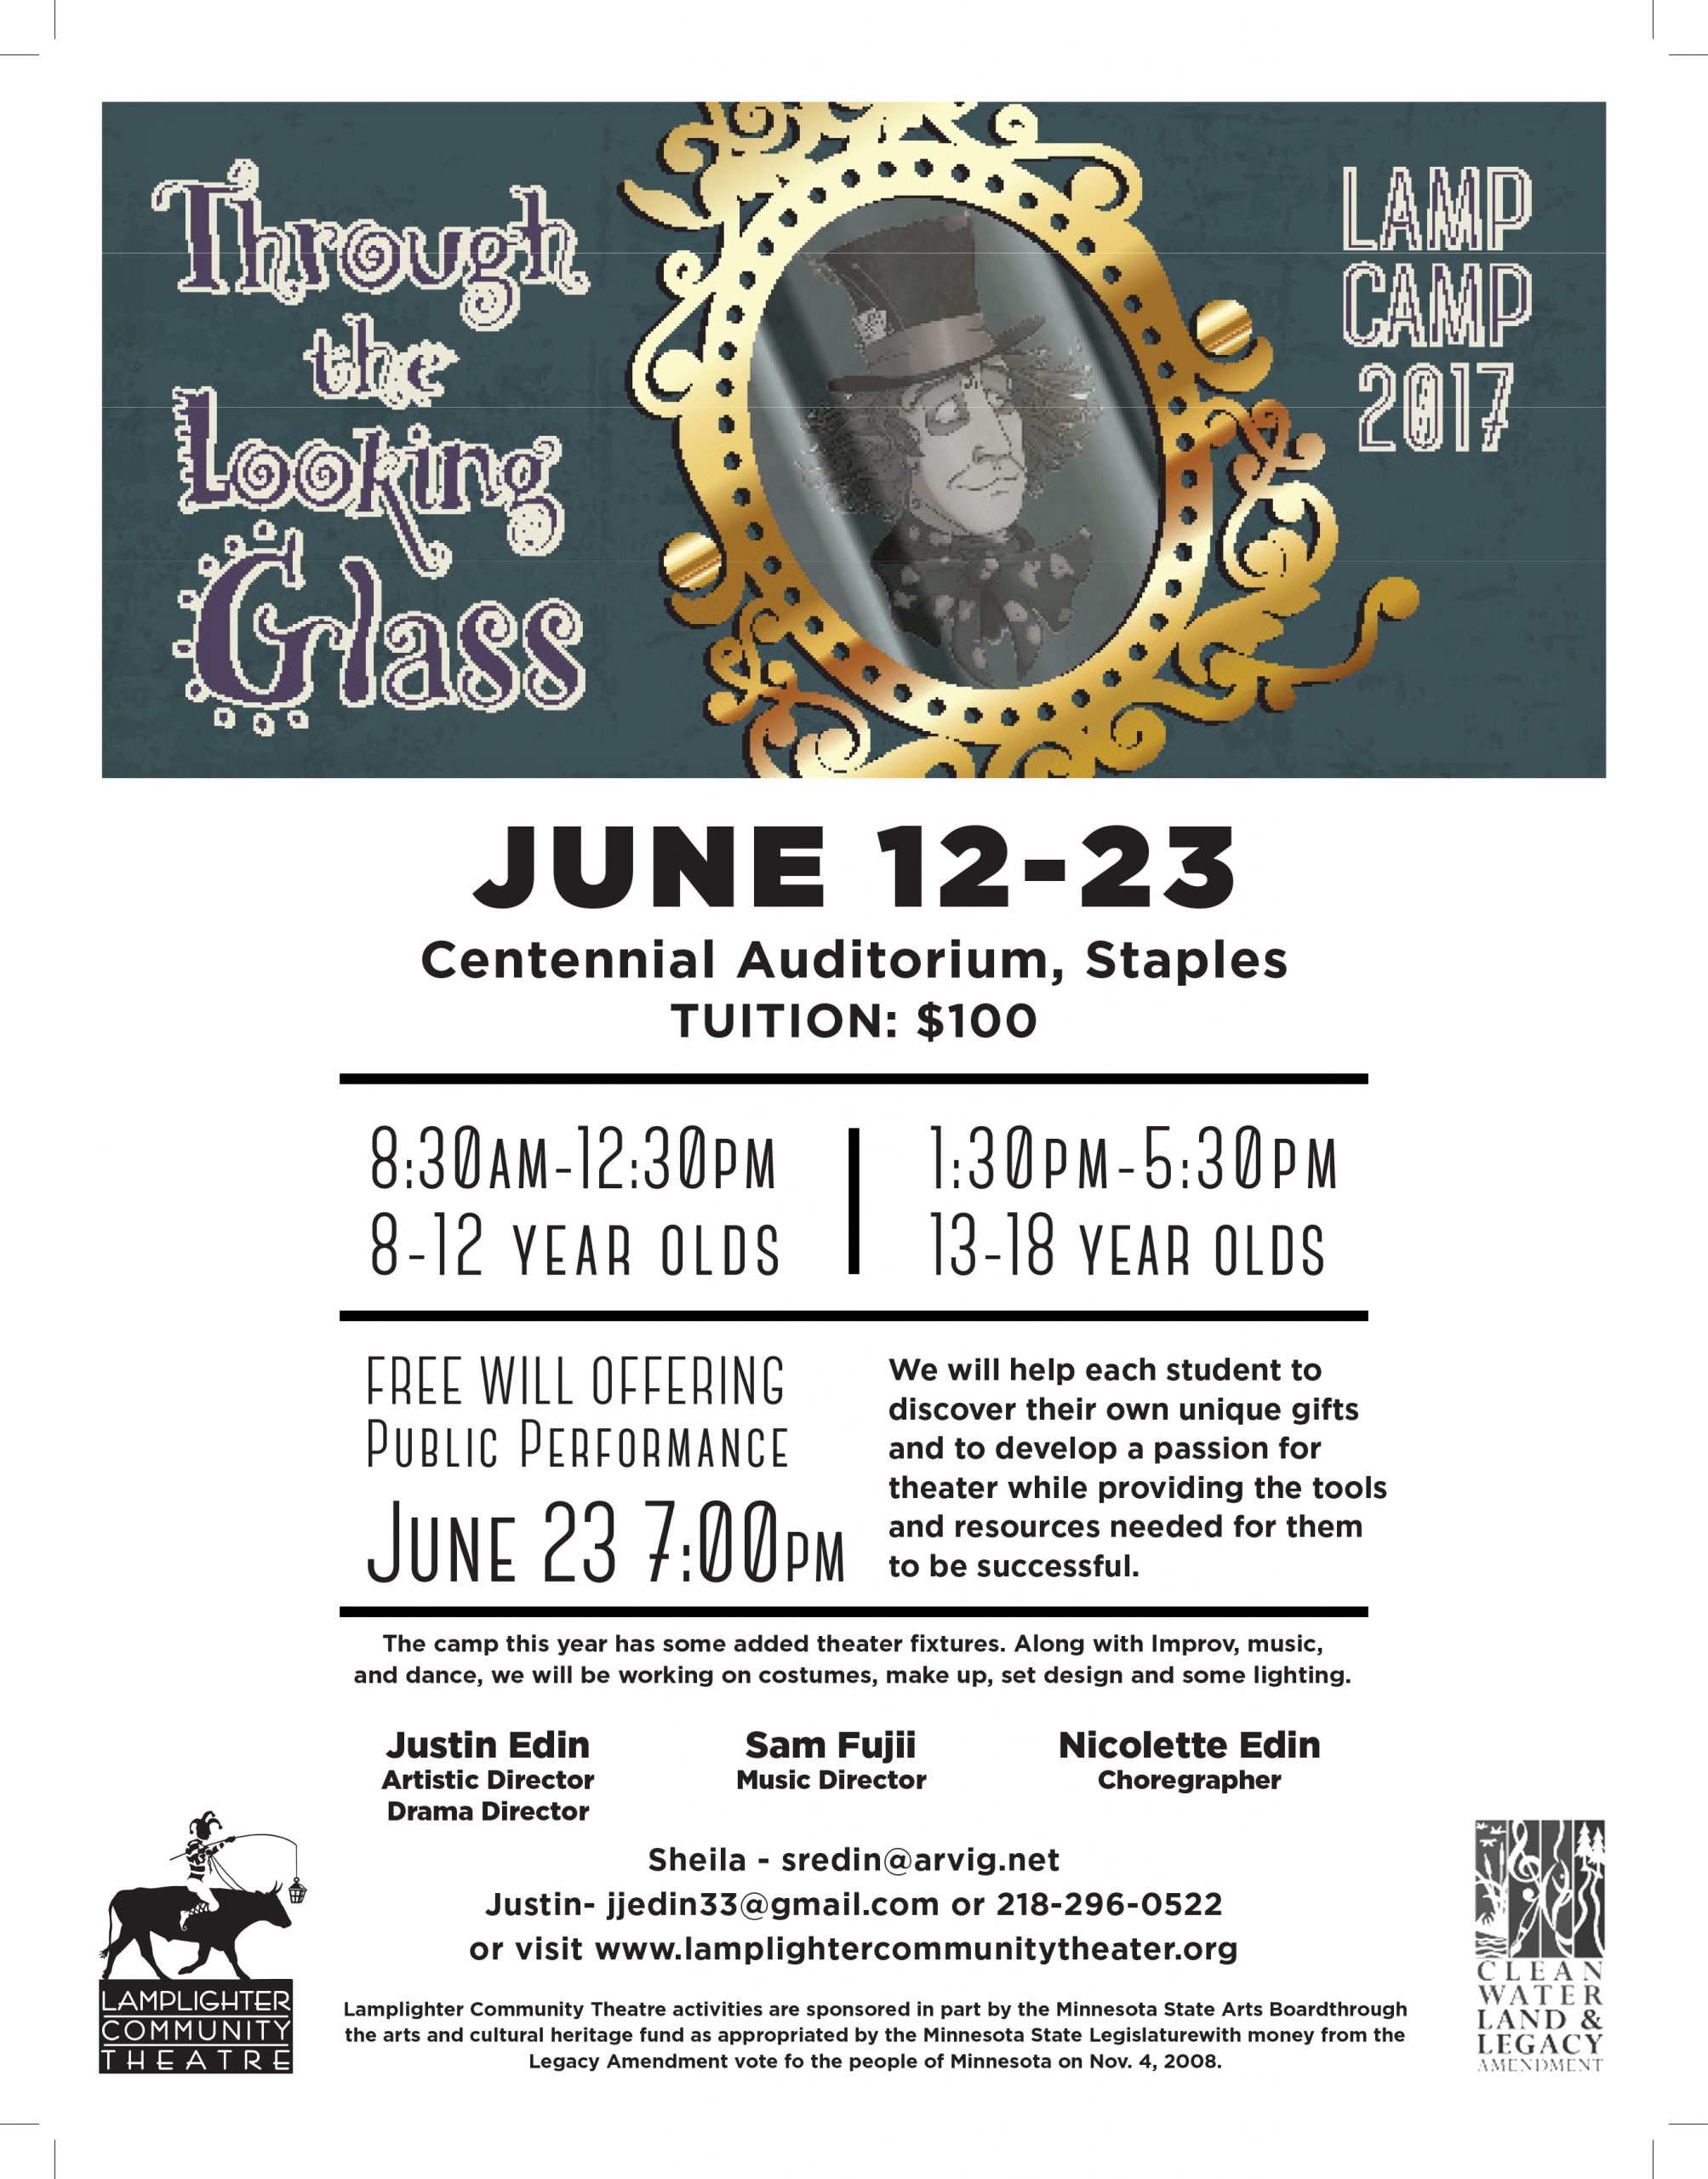 2017 Lamp Camp – Through the Looking Glass